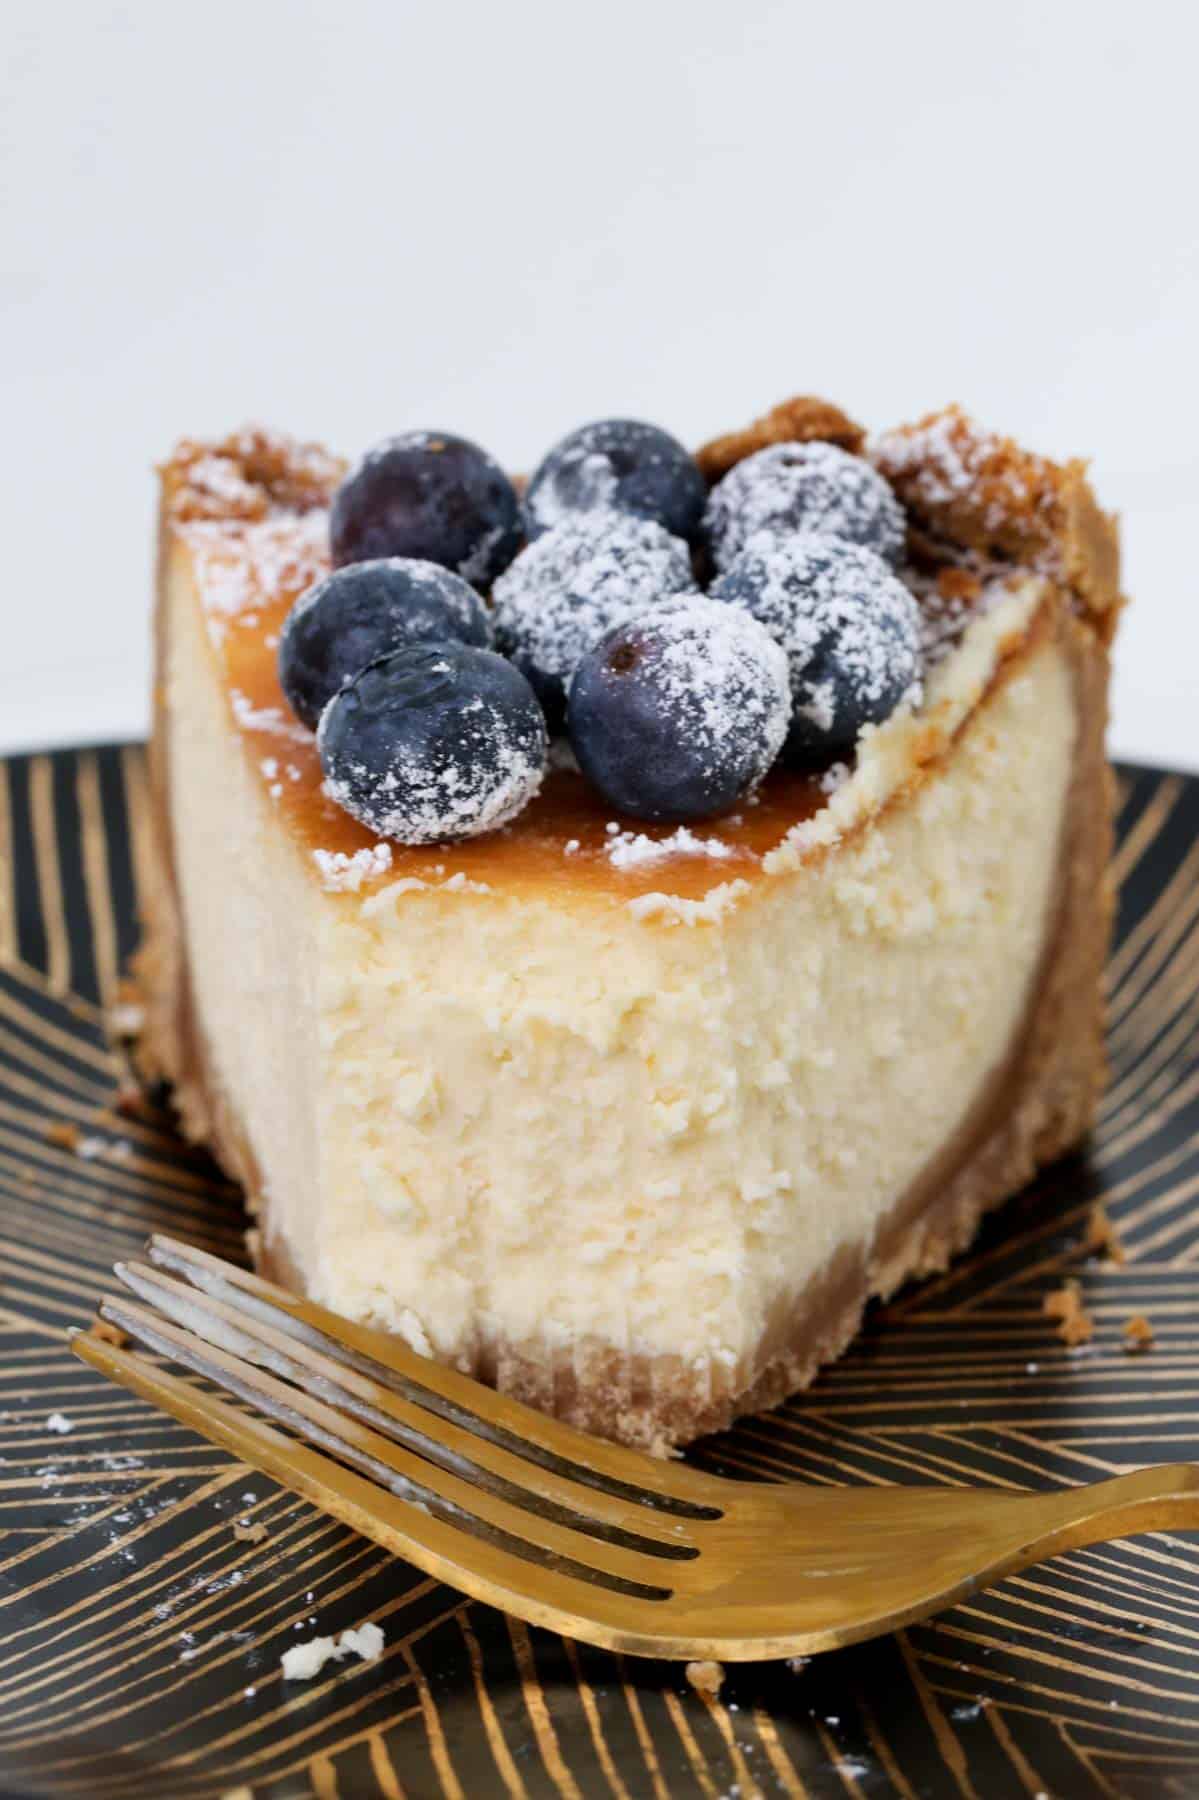 A half eaten piece of New York cheesecake with blueberries on top.